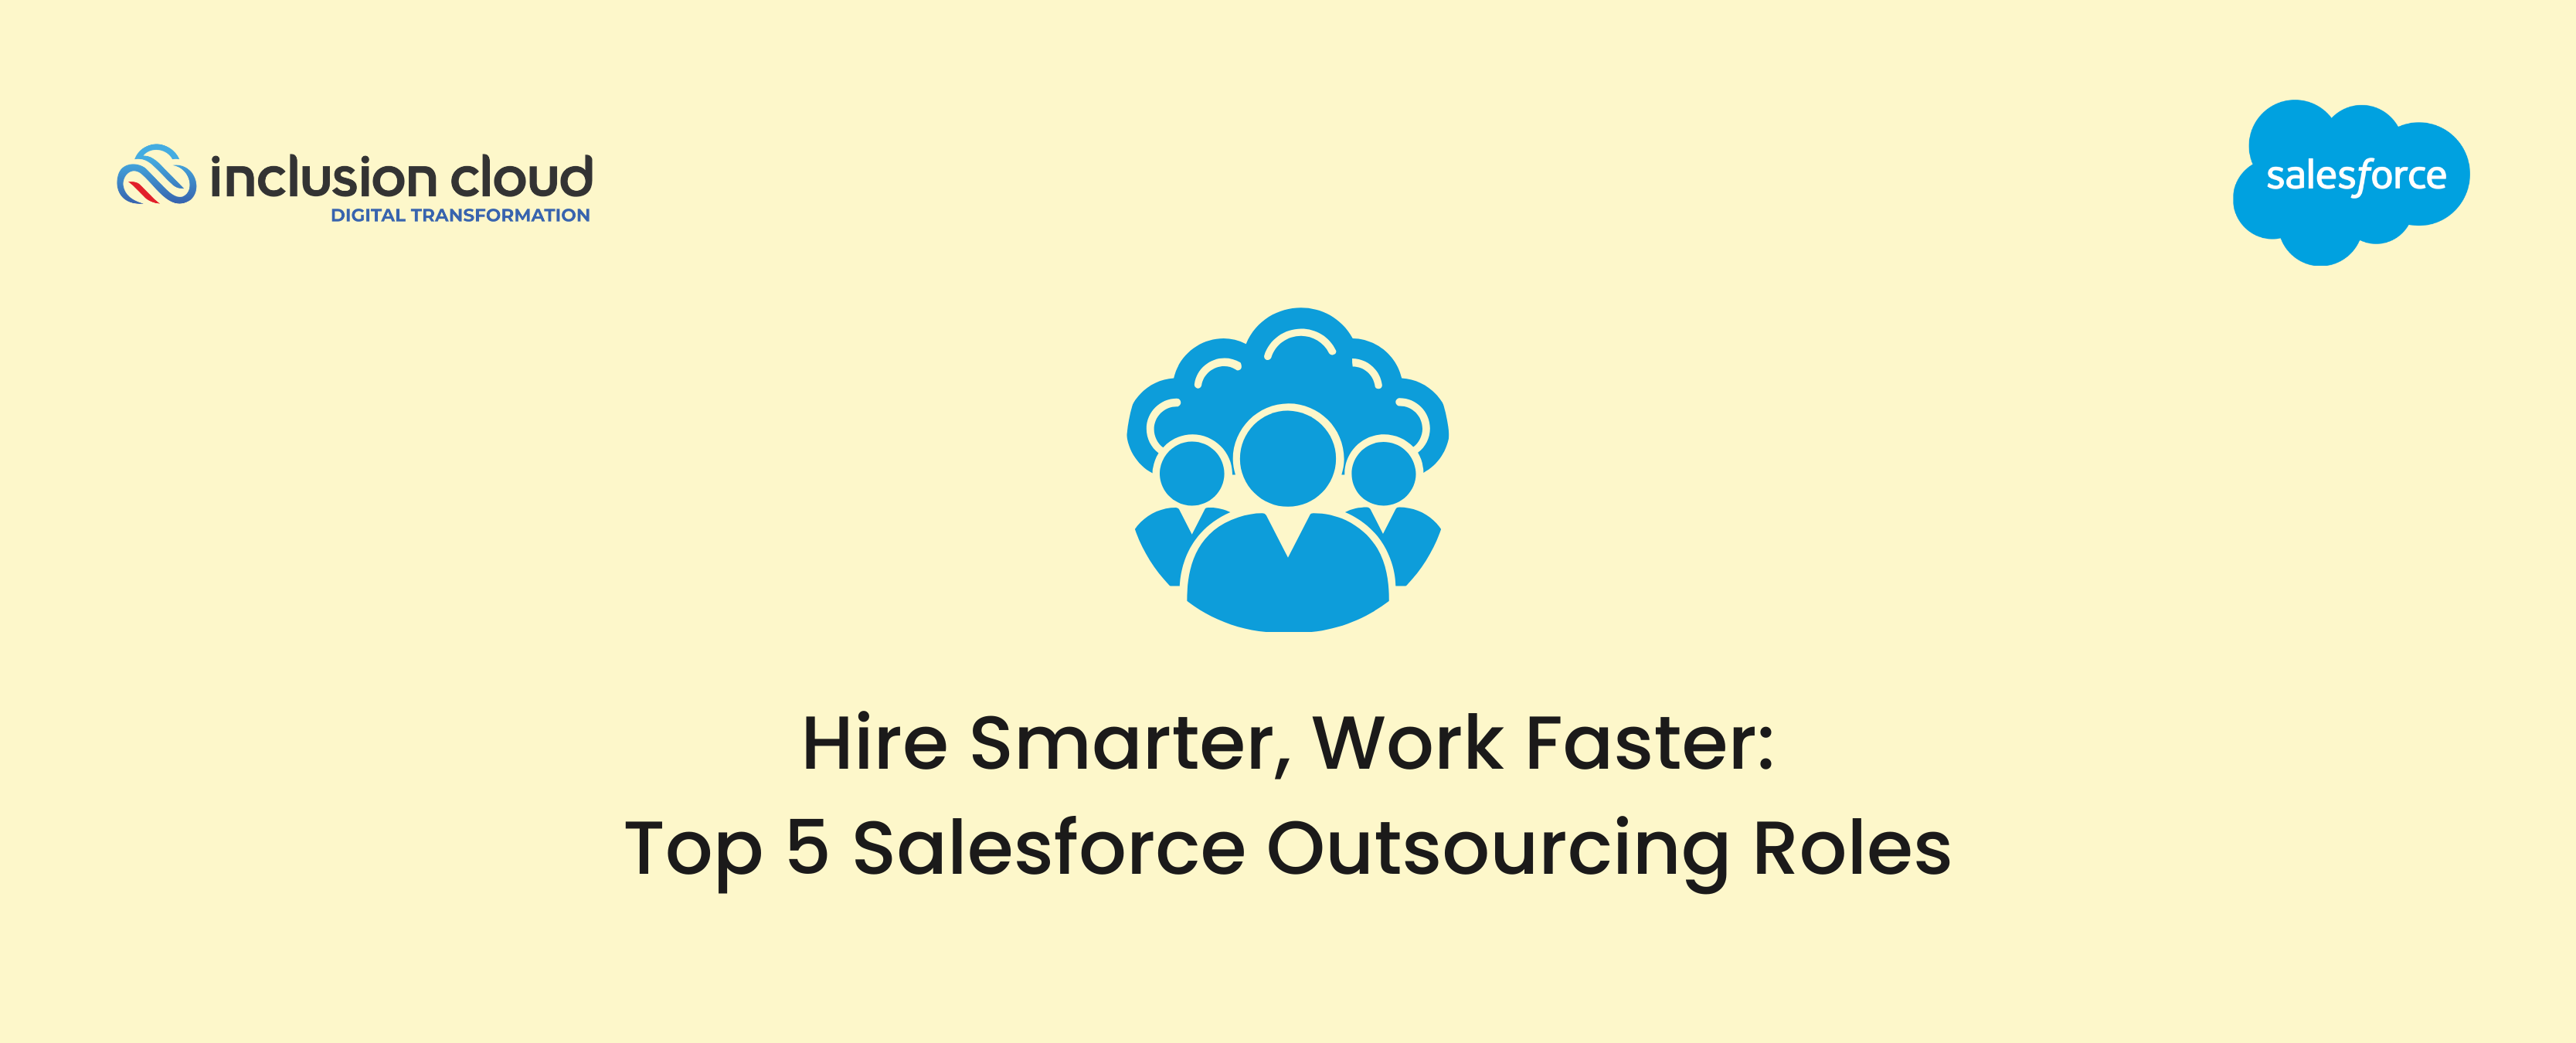 Top 5 Salesforce Outsourcing Roles for Business